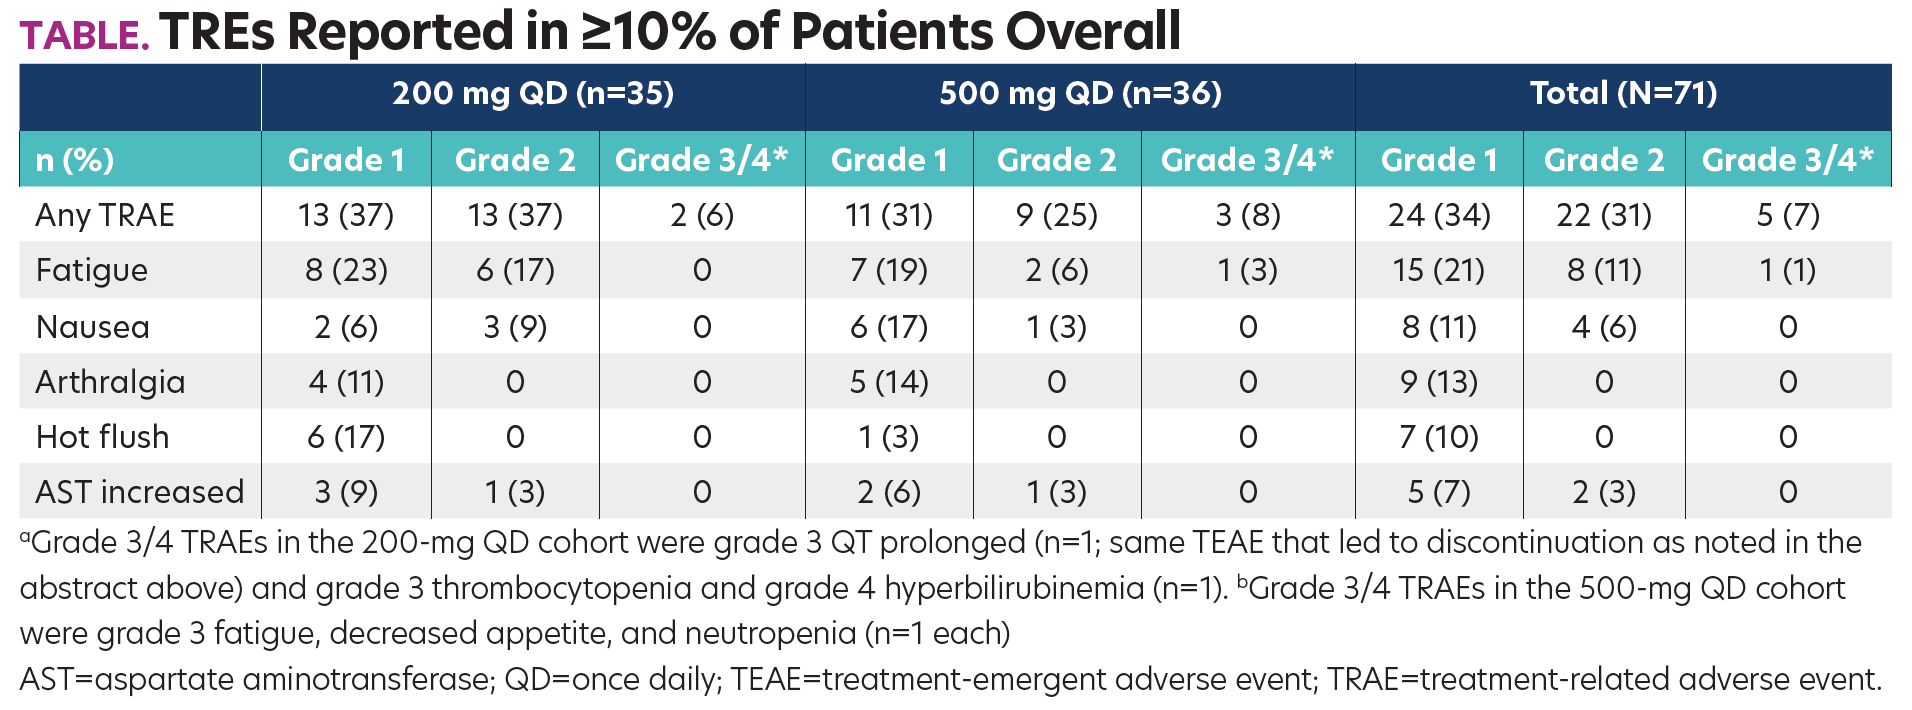 TABLE. TREs Reported in ≥10% of Patients Overall